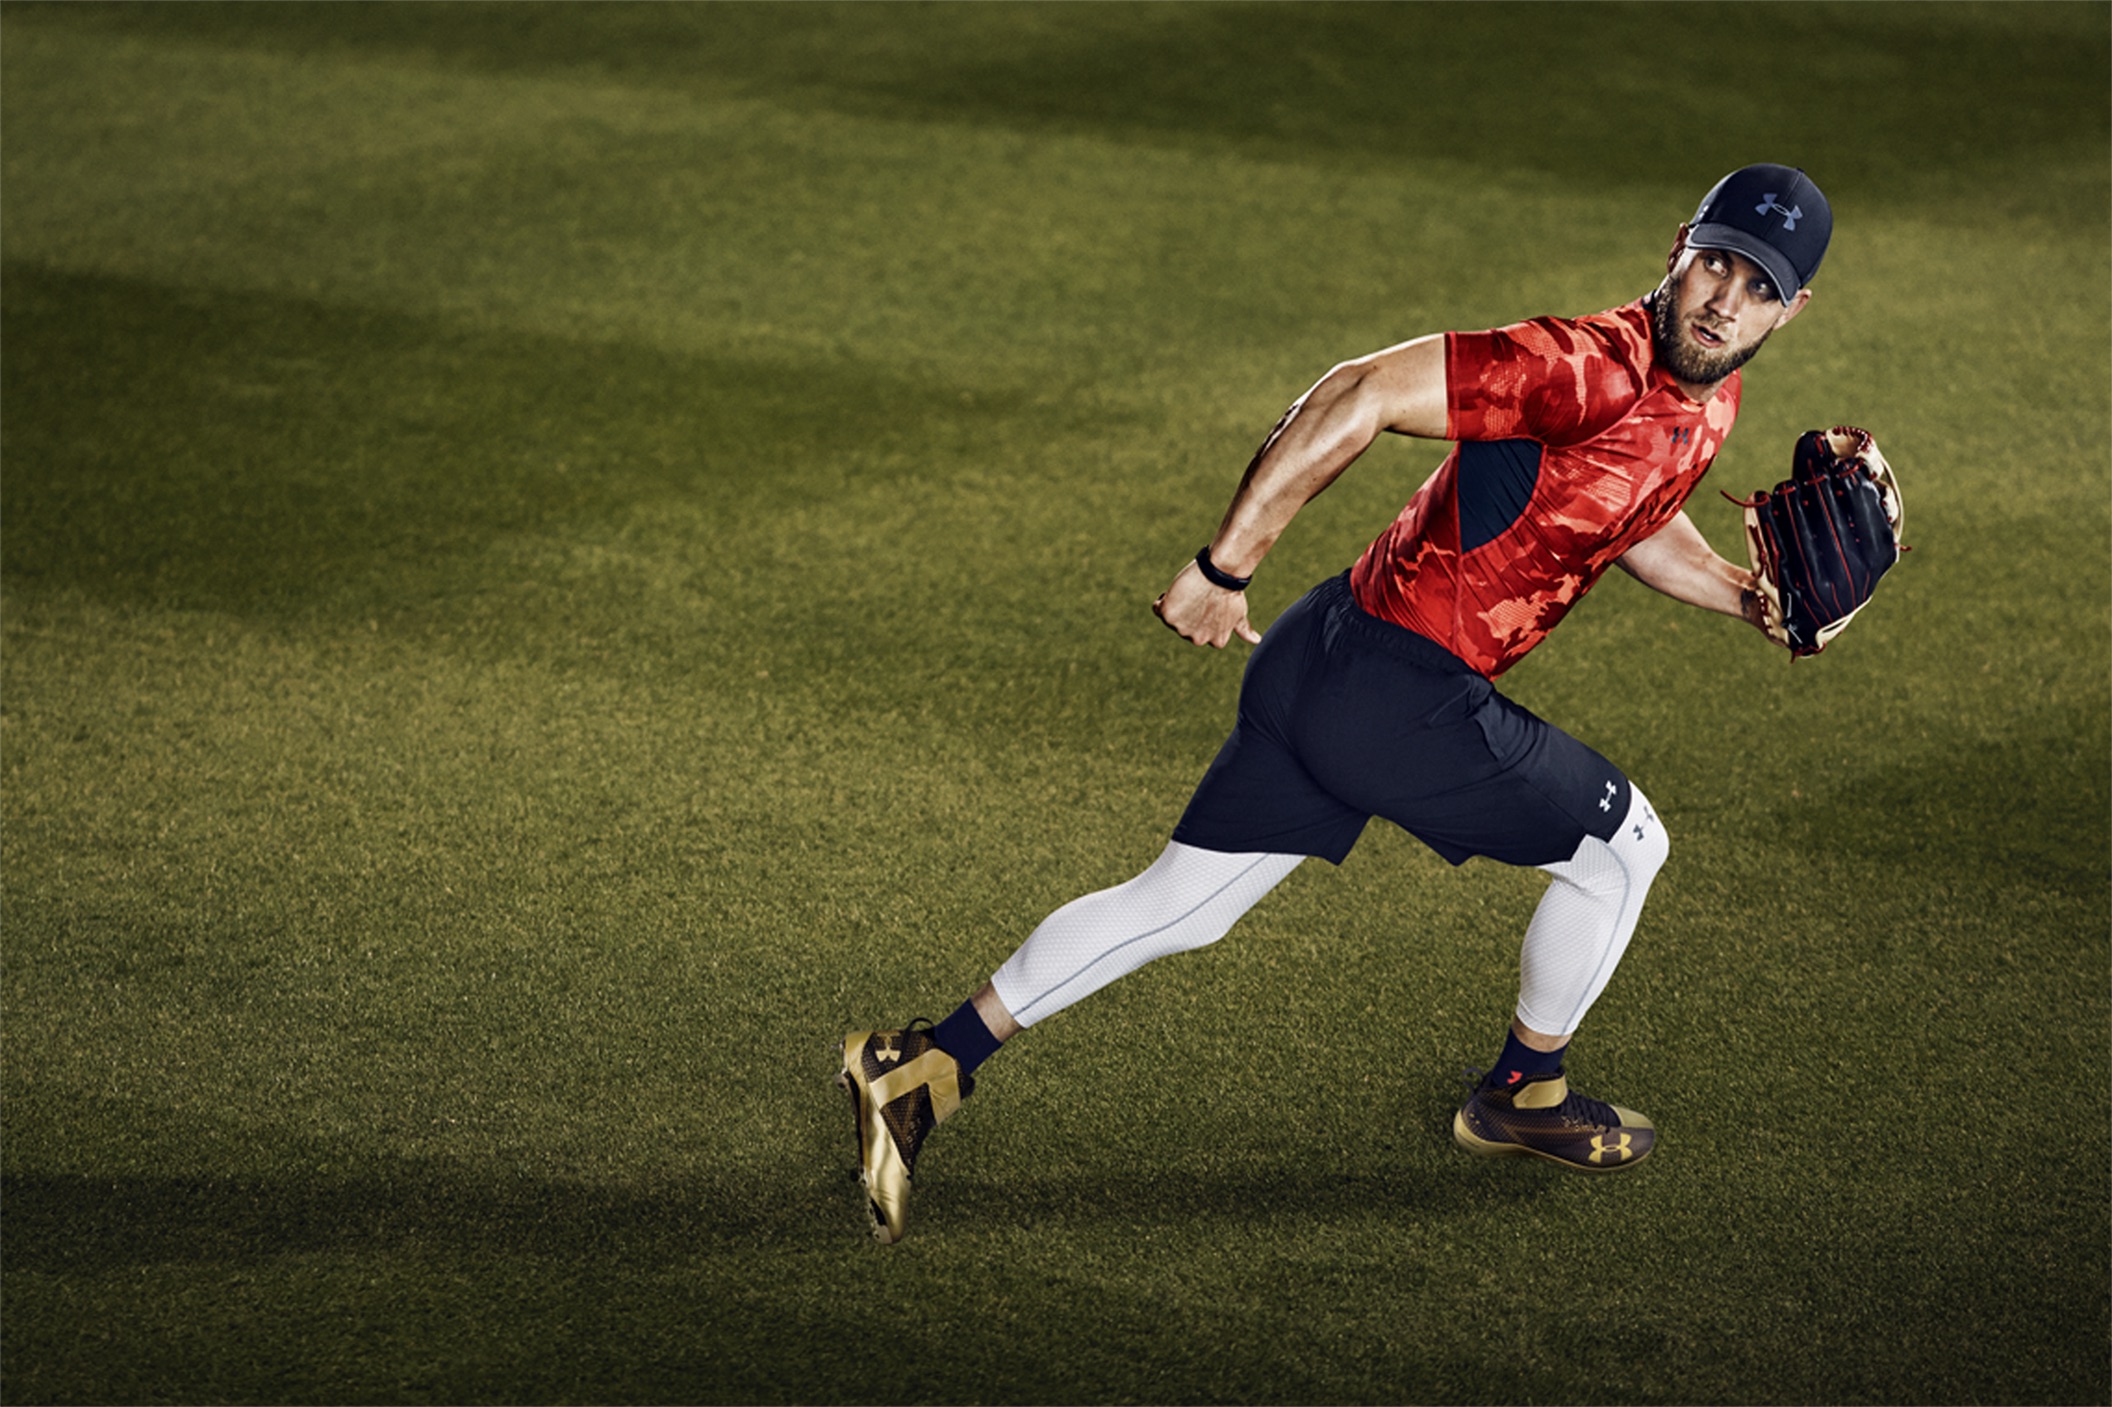 Centralizar Perfecto Pasto Watch the stirring new Under Armour ad featuring Bryce Harper | For The Win